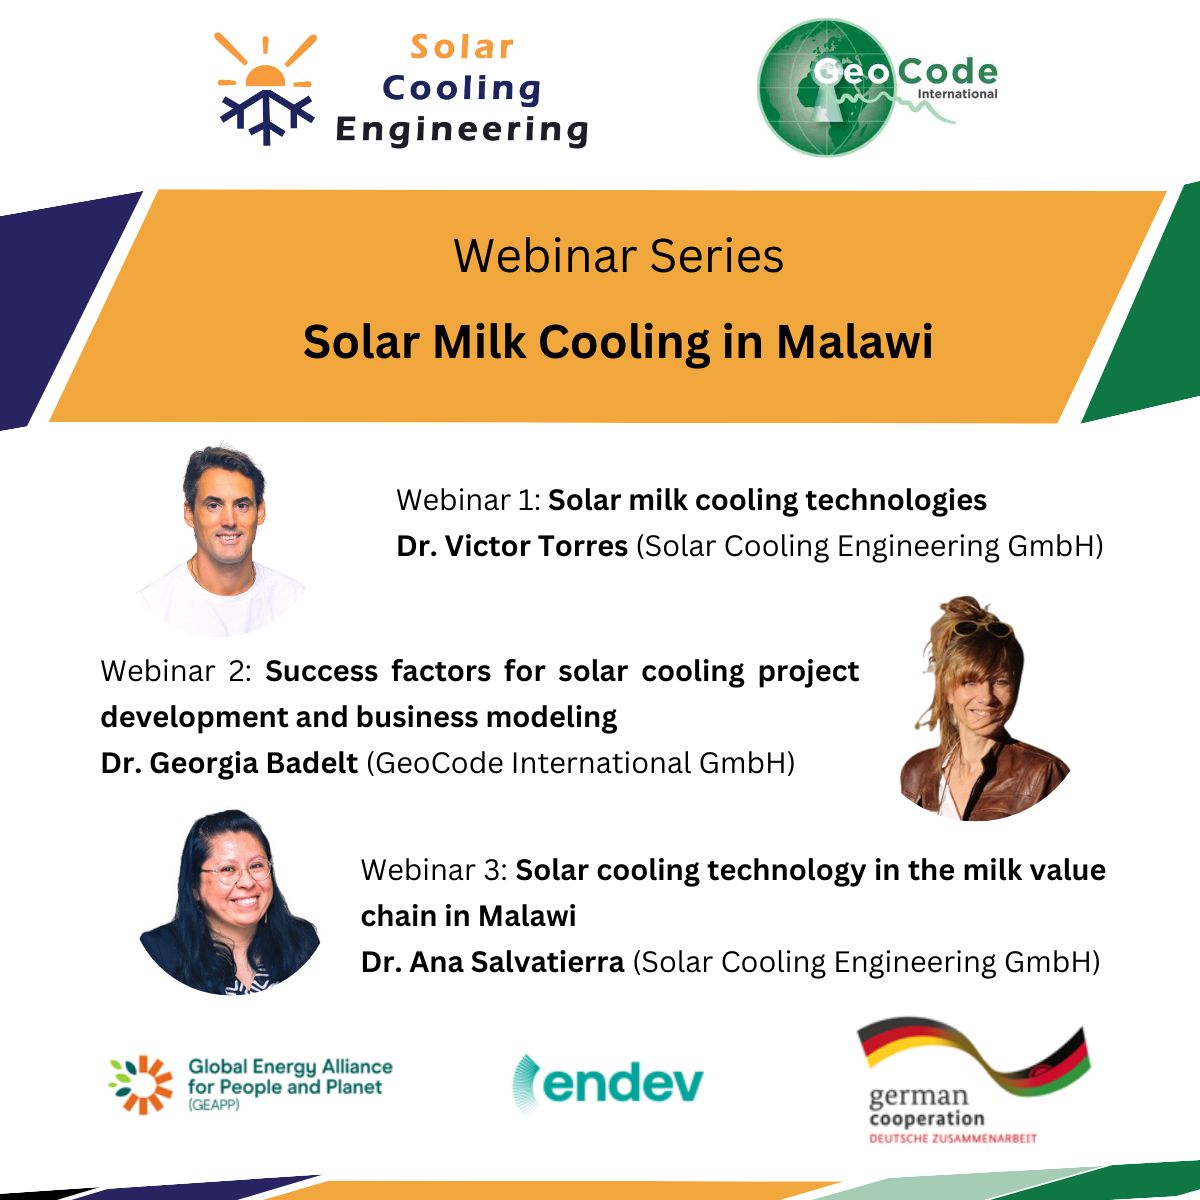 Join @solar_cooling @energyalliance & EnDev for a 3-part webinar series on Solar Milk Cooling in Malawi.

🗓️ Save the dates below:
April 24: Technologies
May 23: Success factors
June 12: Milk value chain

Register here: solar-cooling-engineering.com/milk-cooling-m… #LetsChangeEnergy